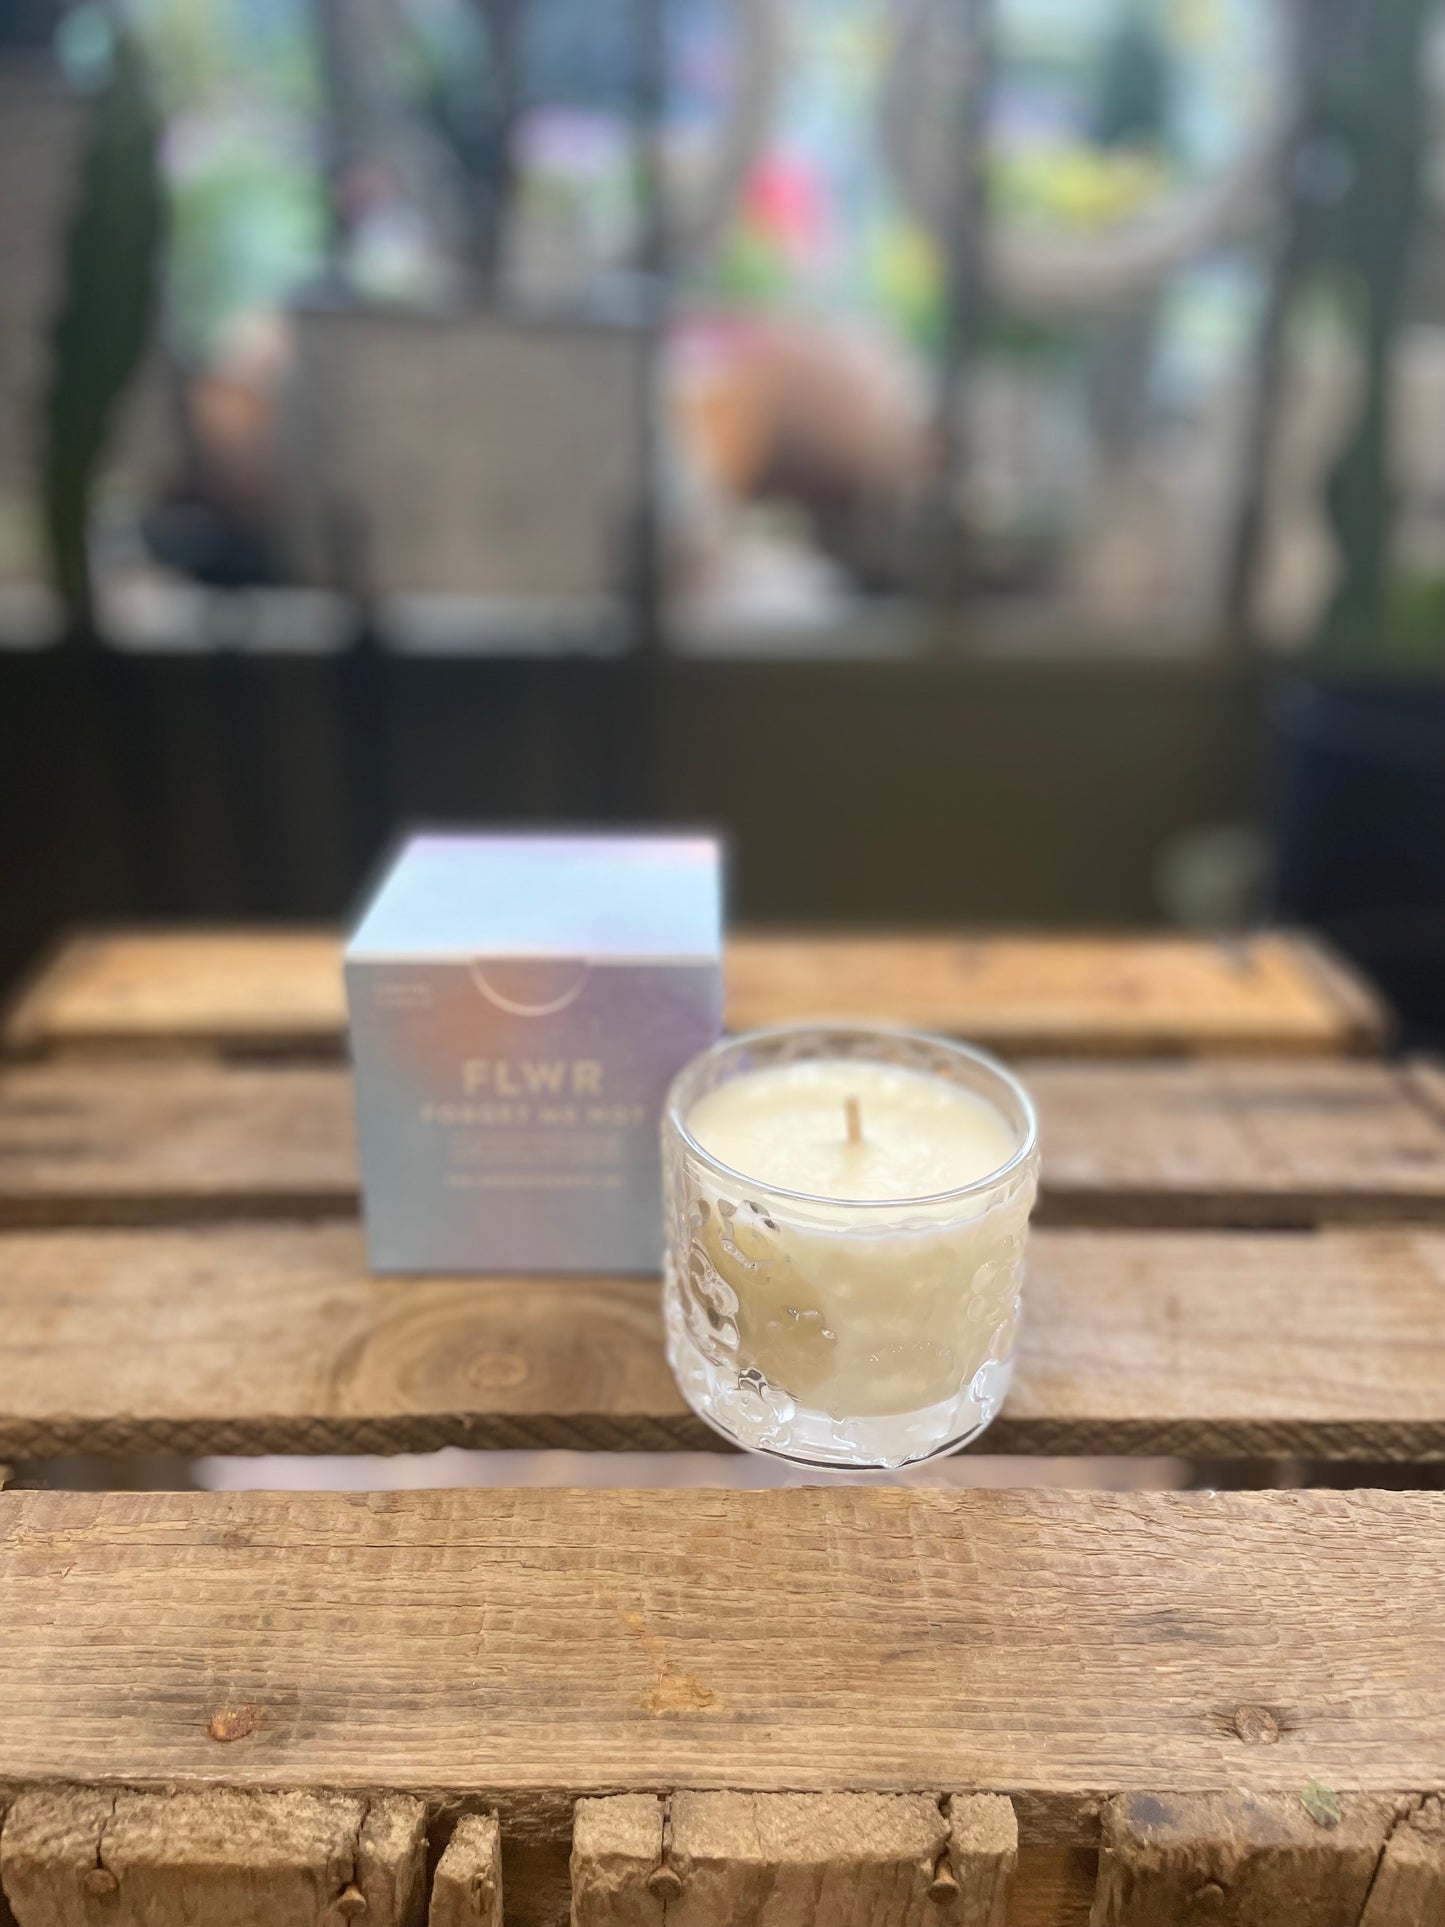 FLWR Candles from The aromatherapy co.